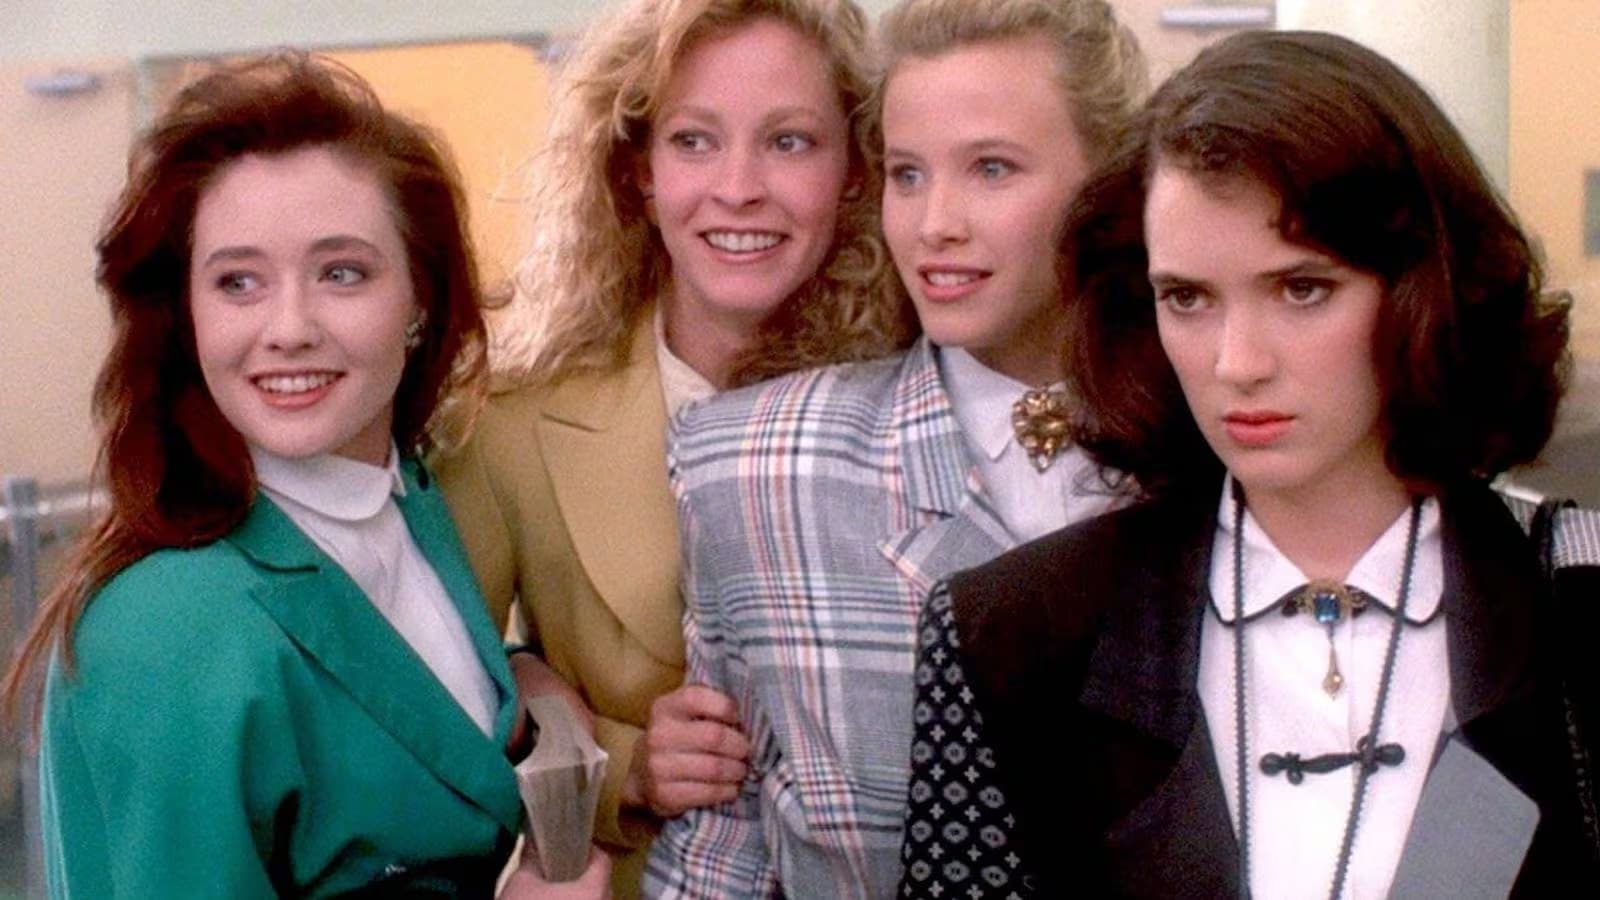 Cast from the Heathers film